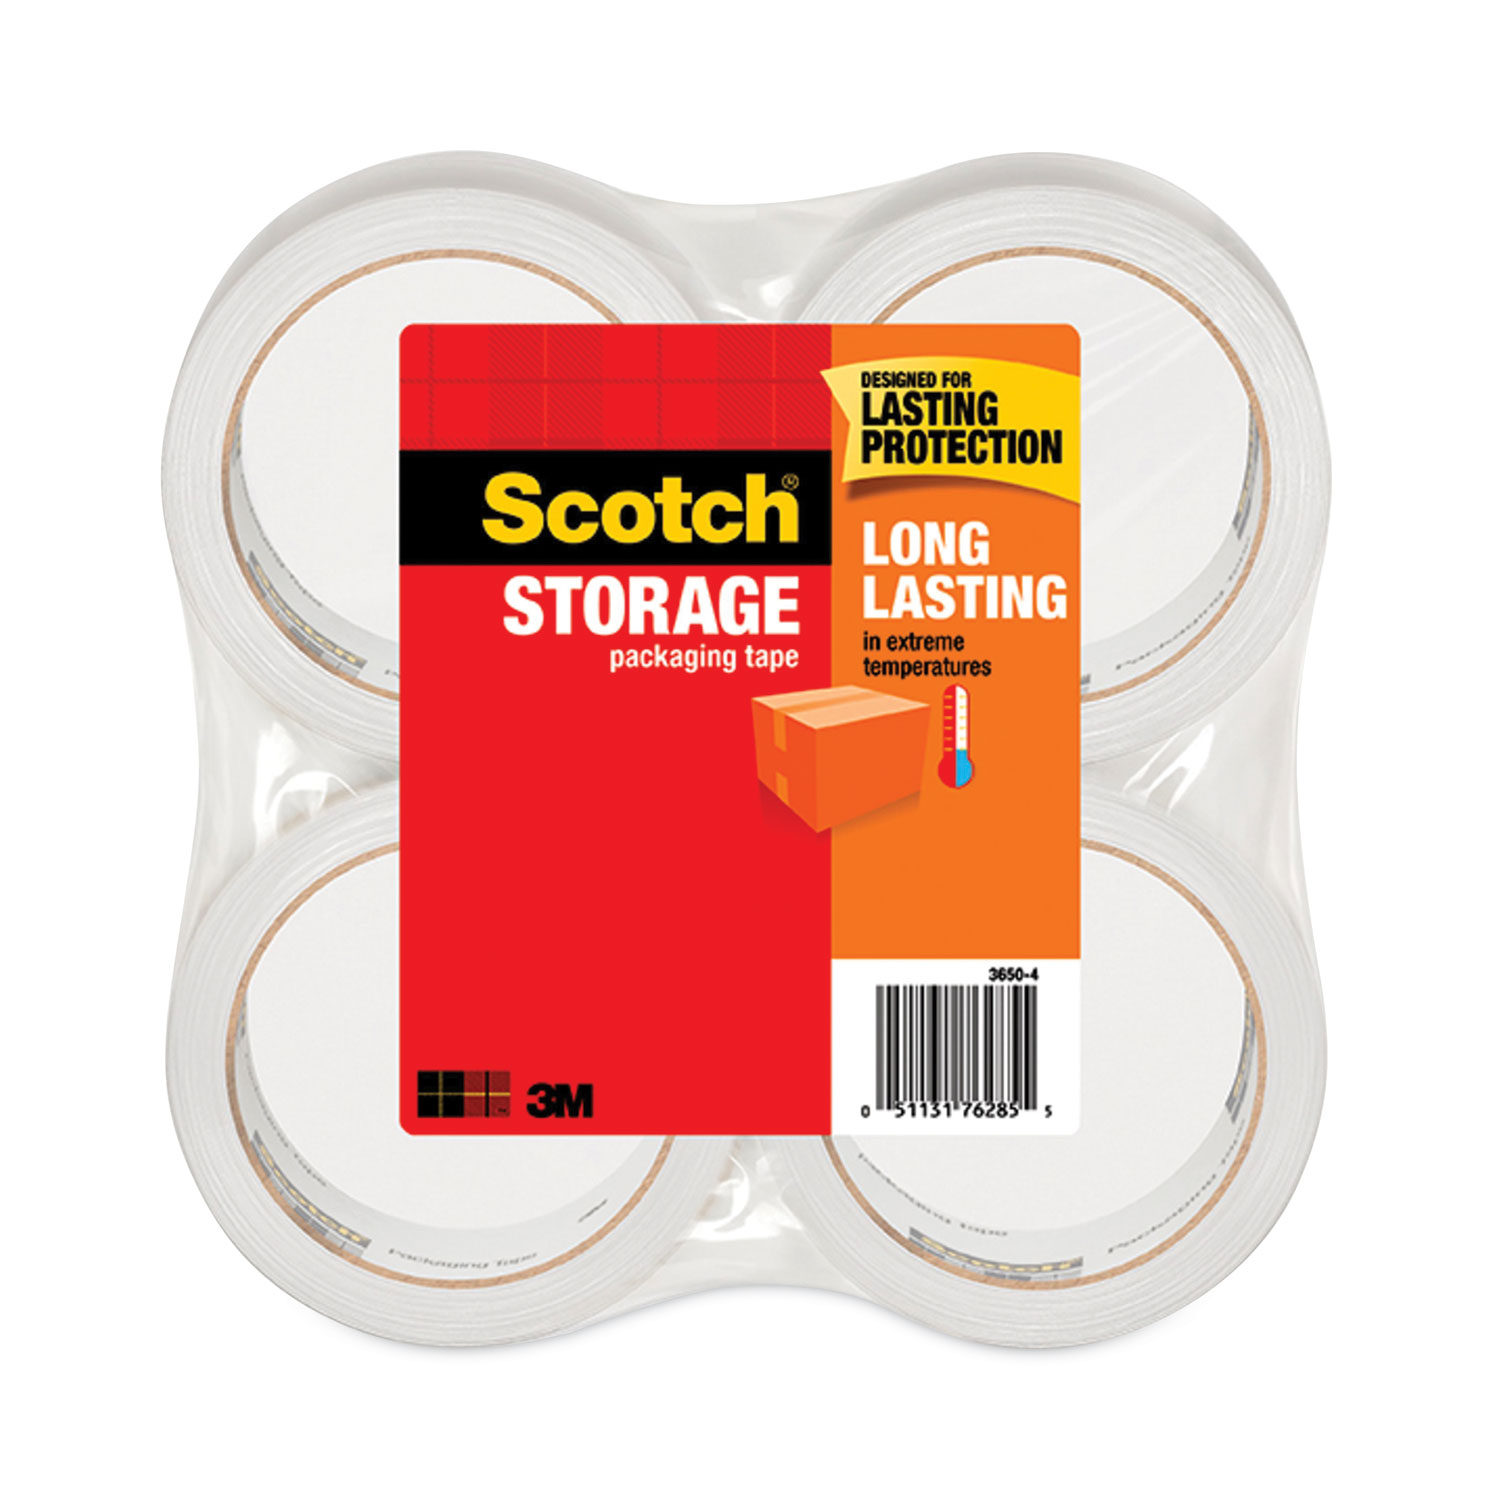 Scotch Heavy Duty Packaging Tape, 1.88 x 54.6 yd, Designed for